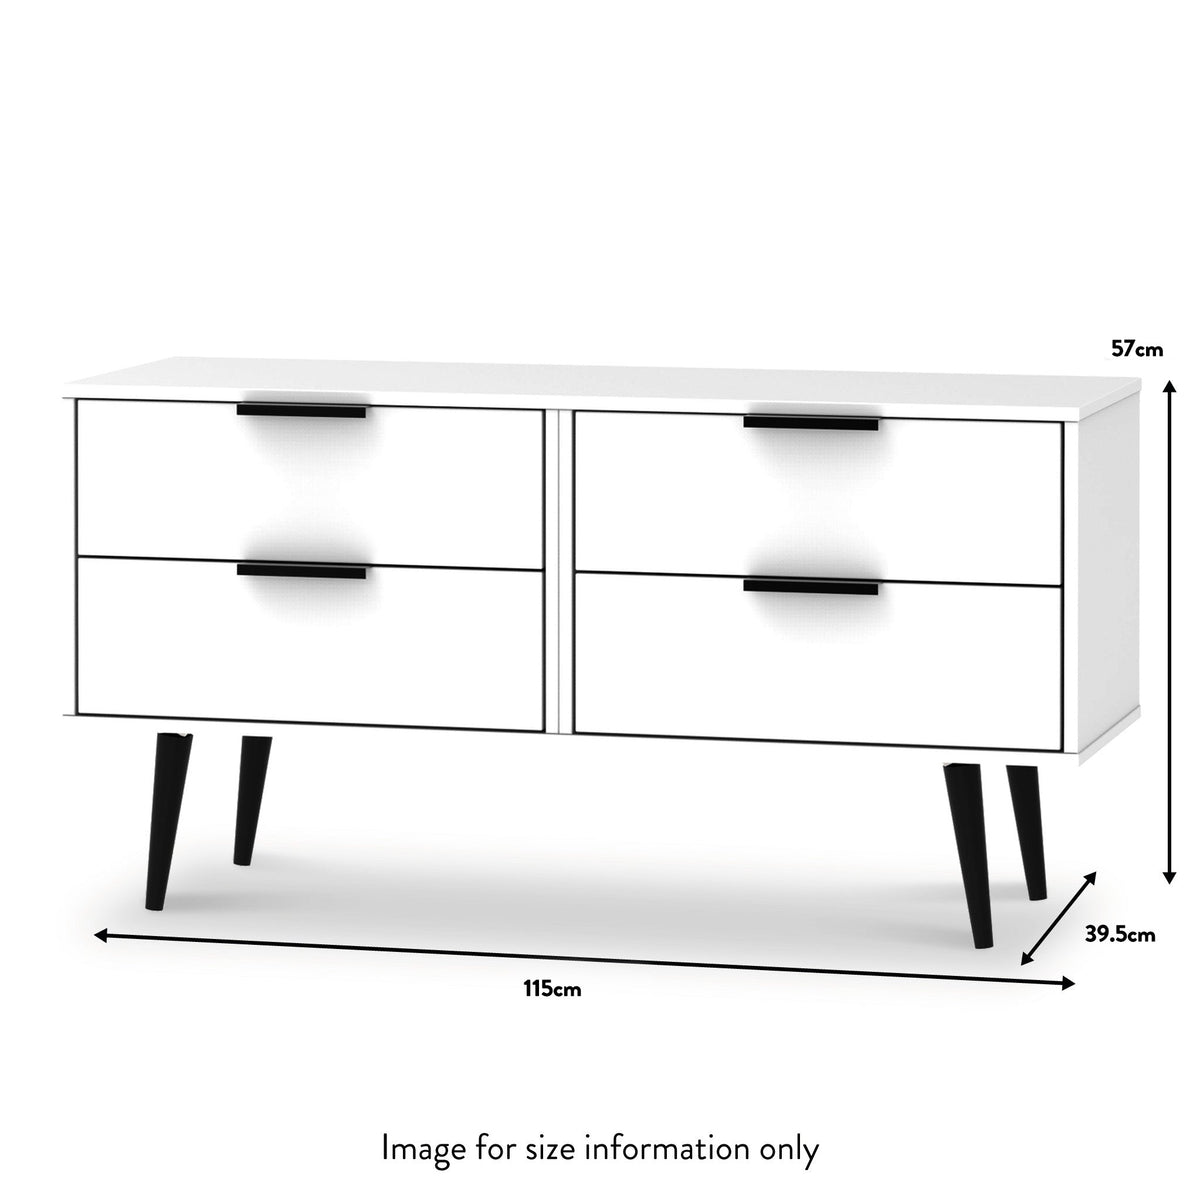 Asher White 4 Drawer Low Storage Chest dimensions